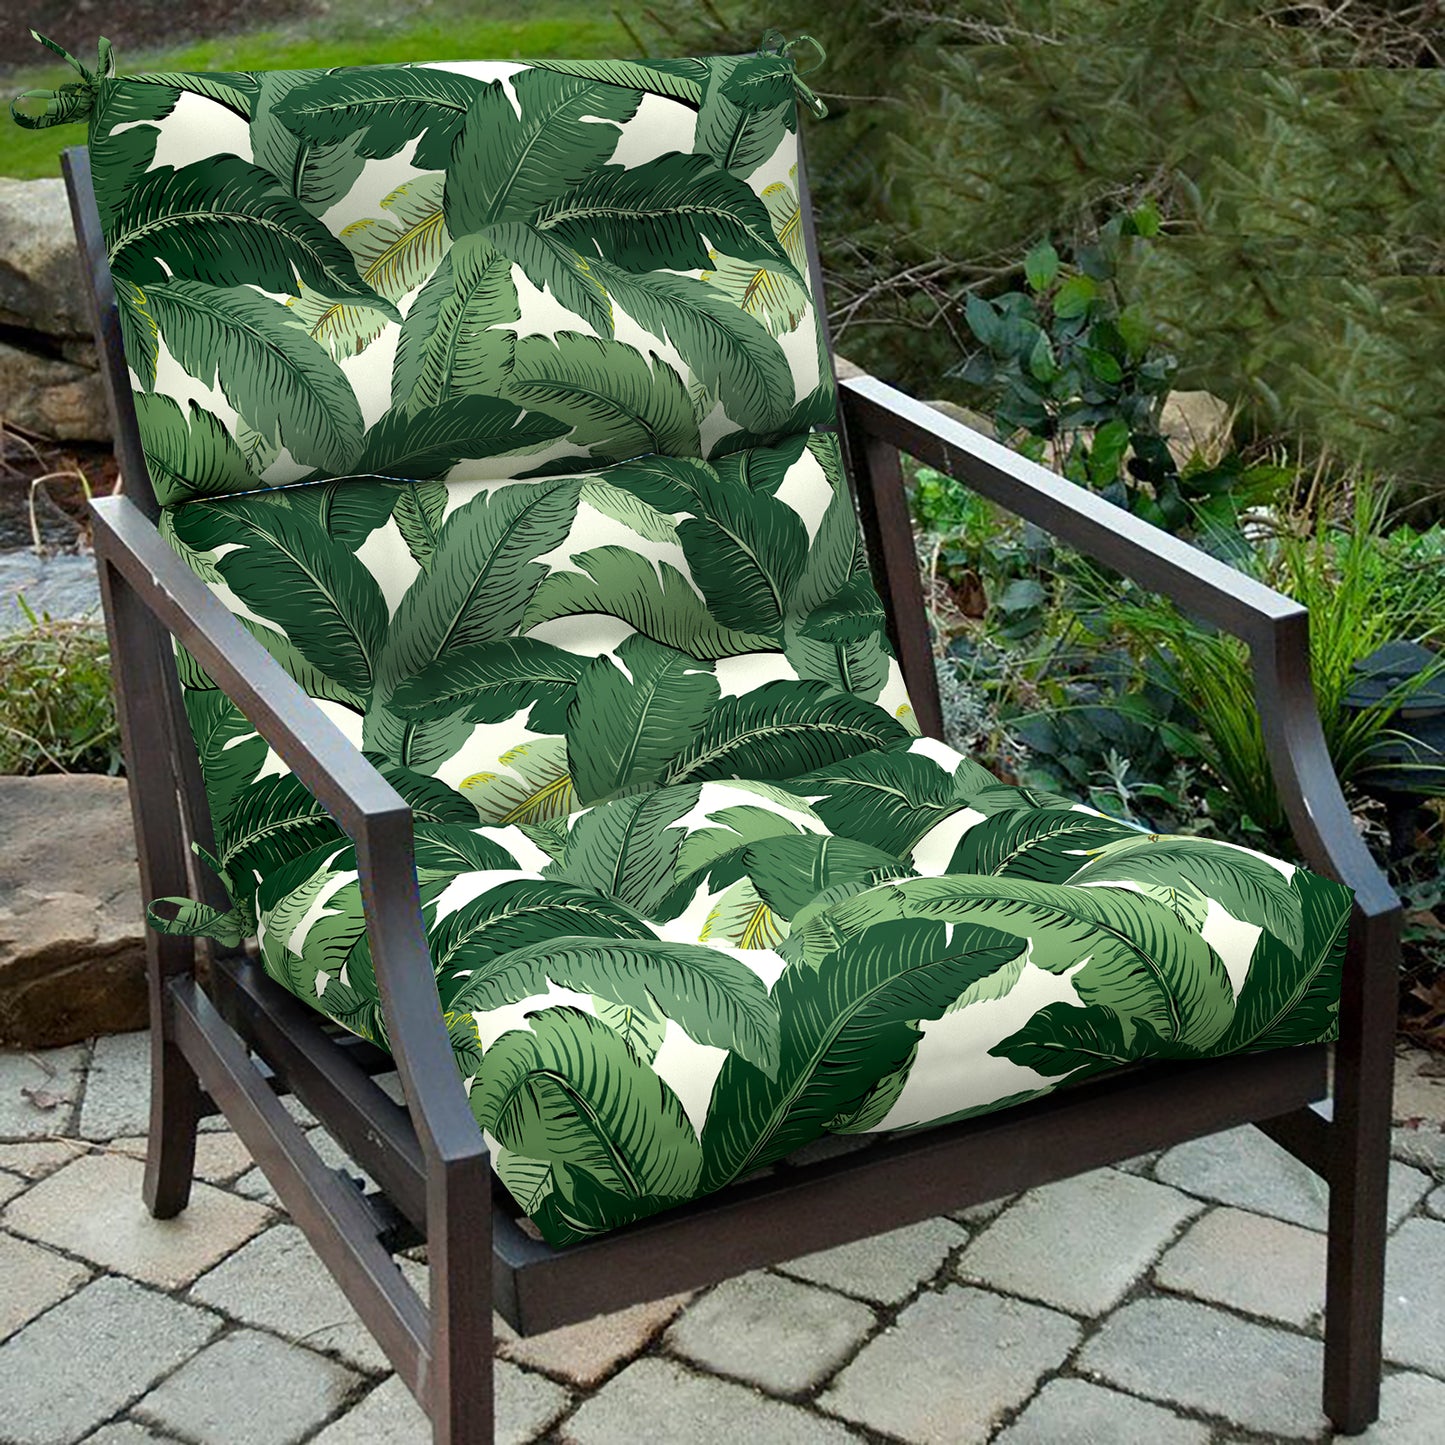 Melody Elephant Outdoor Tufted High Back Chair Cushions, Water Resistant Rocking Seat Chair Cushions 2 Pack, Adirondack Cushions for Patio Home Garden, 22" W x 20" D, Swaying Palms Green